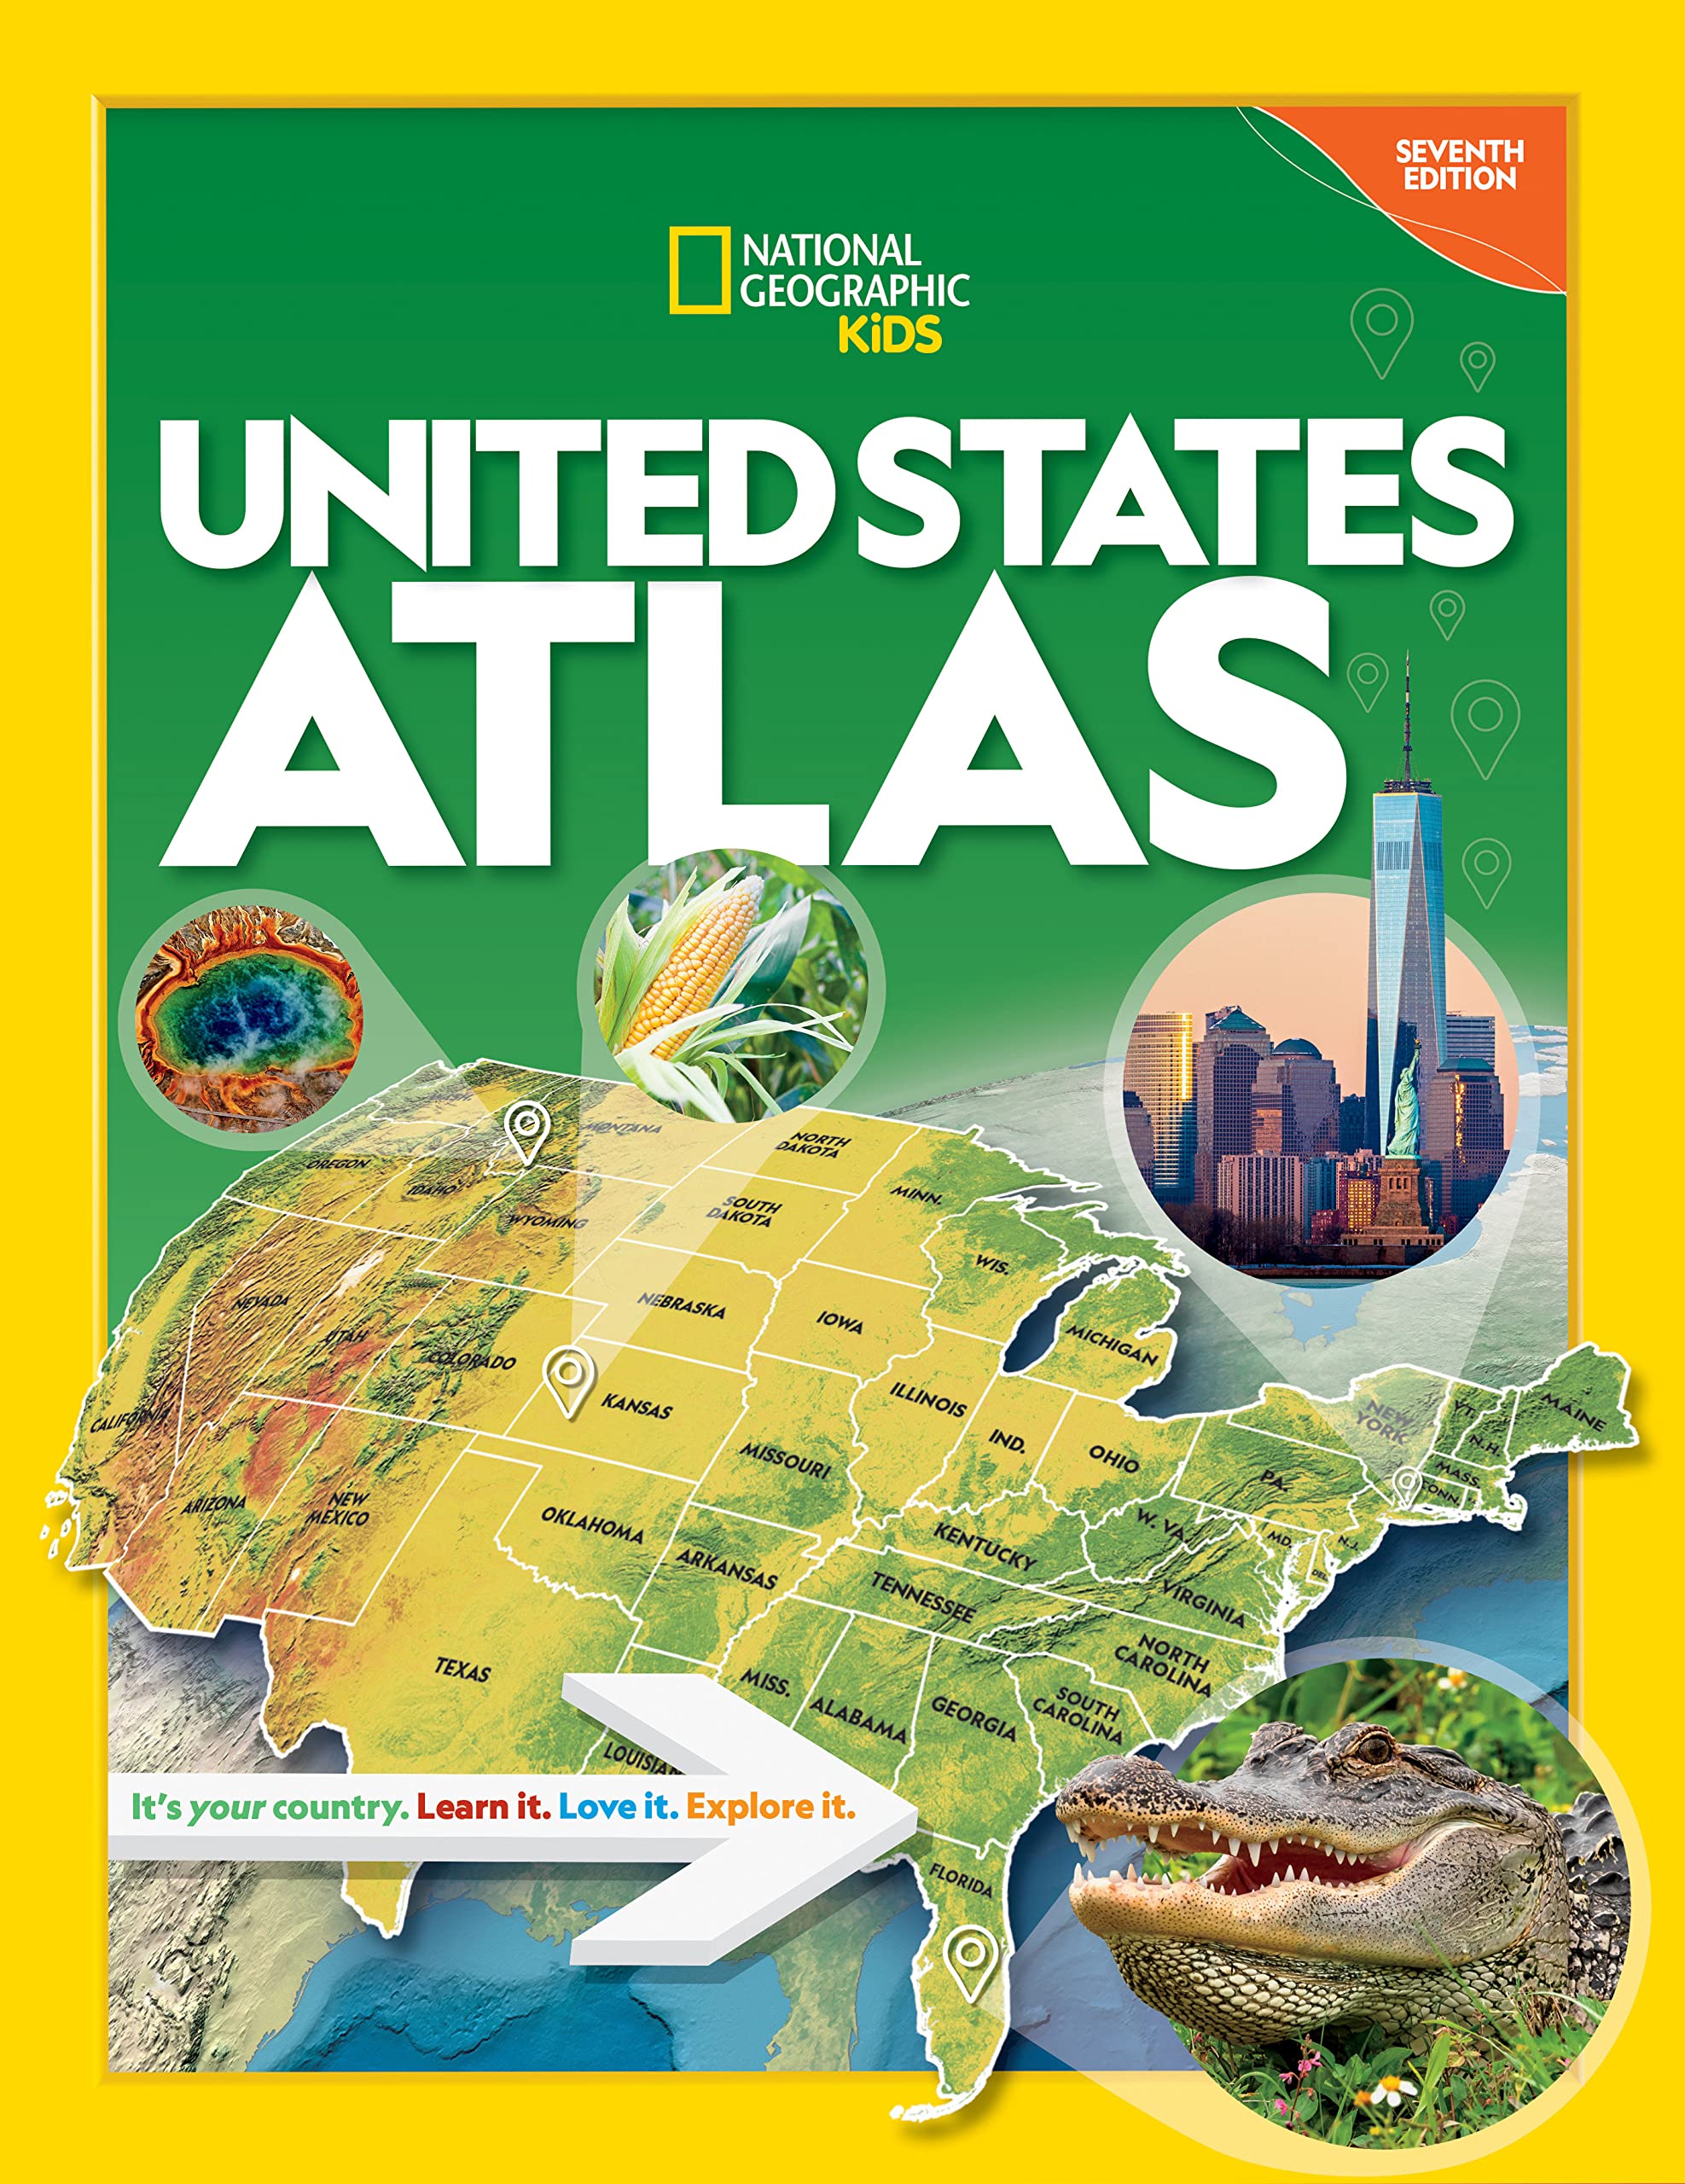 National Geographic Kids United States Atlas 7th edition (The National Geographic Kids)